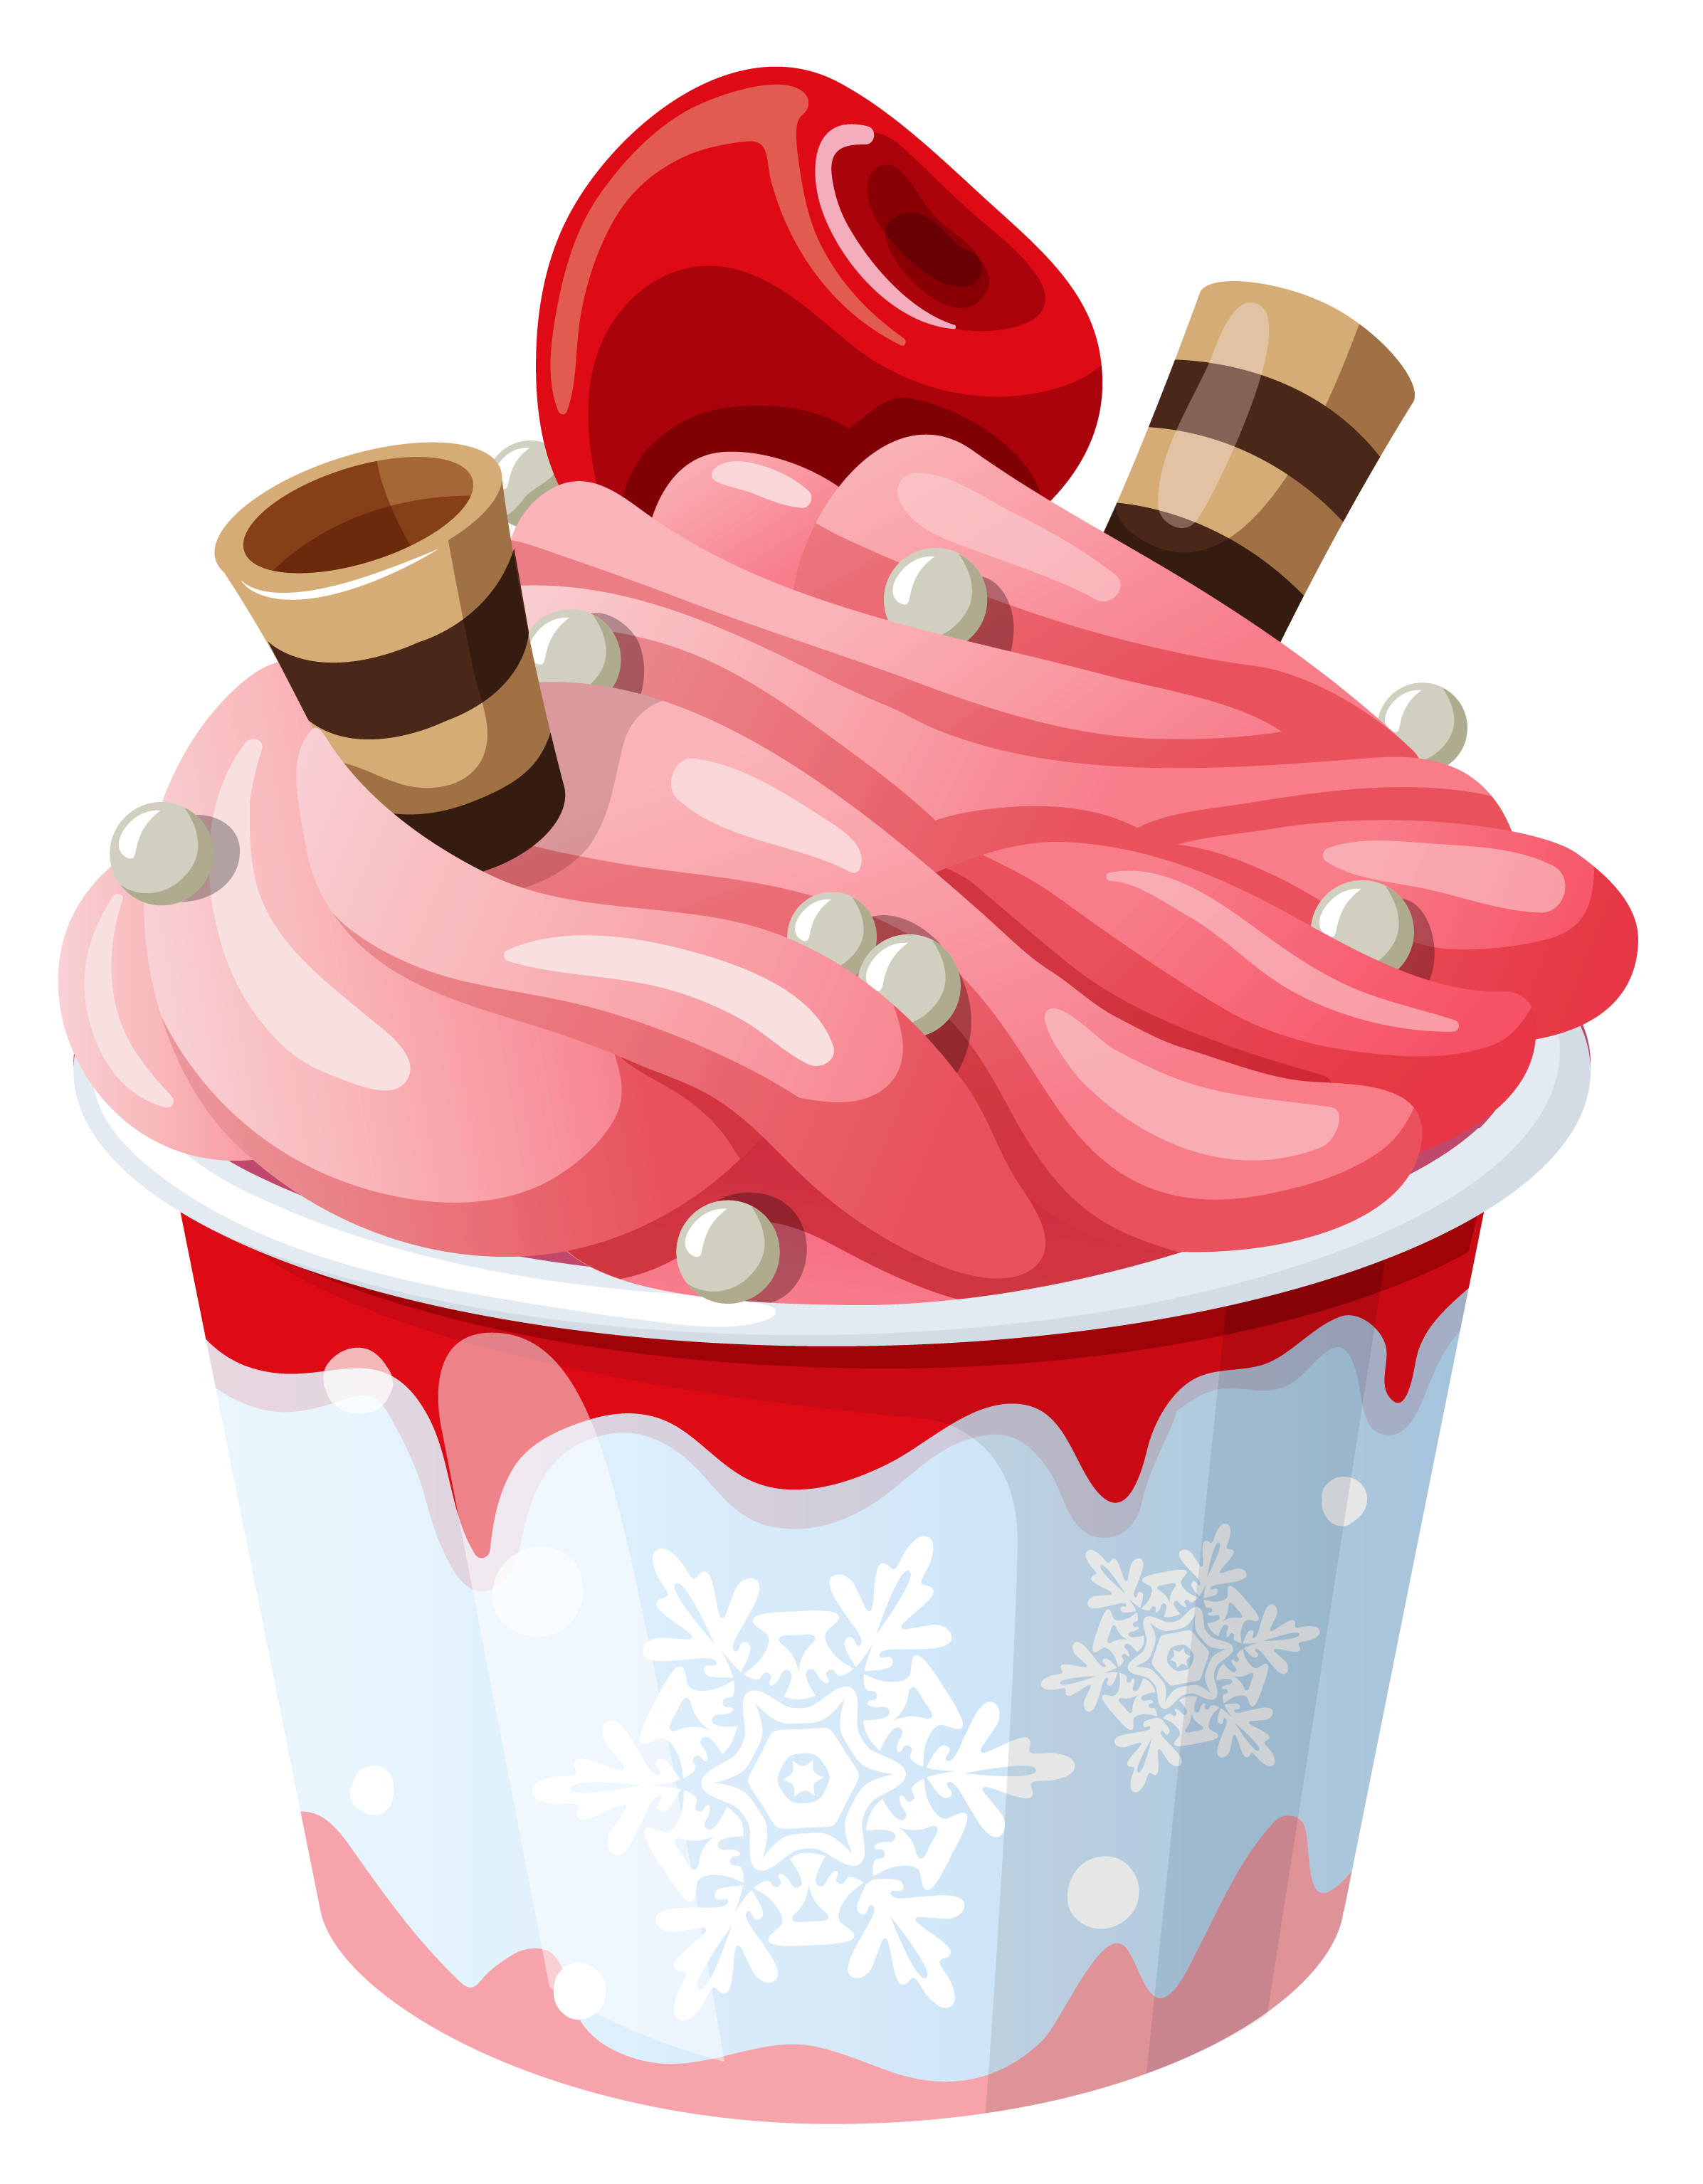 ice cream in a bowl clipart - photo #20